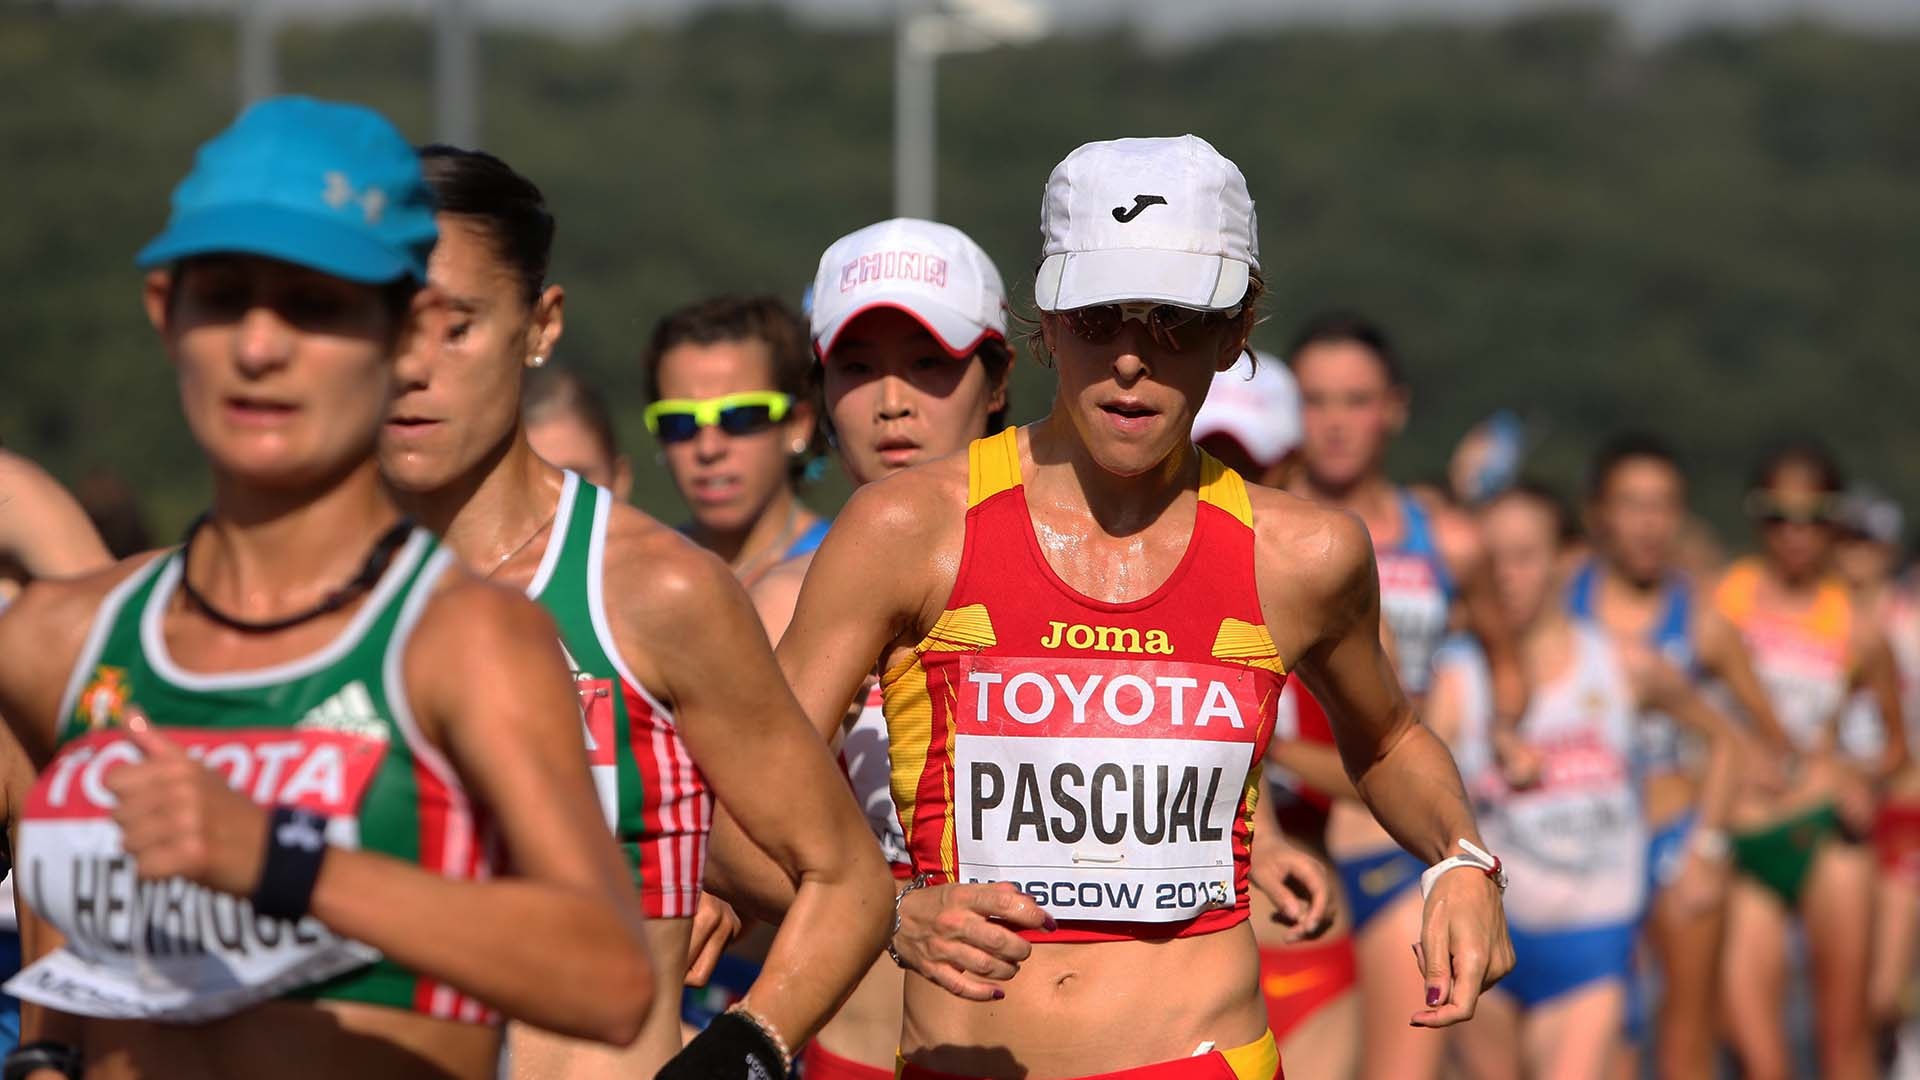 Racewalking: Beatriz Pascual, Spain's national champion in the 20 km walk, Moscow 2013 World Championship. 1920x1080 Full HD Background.